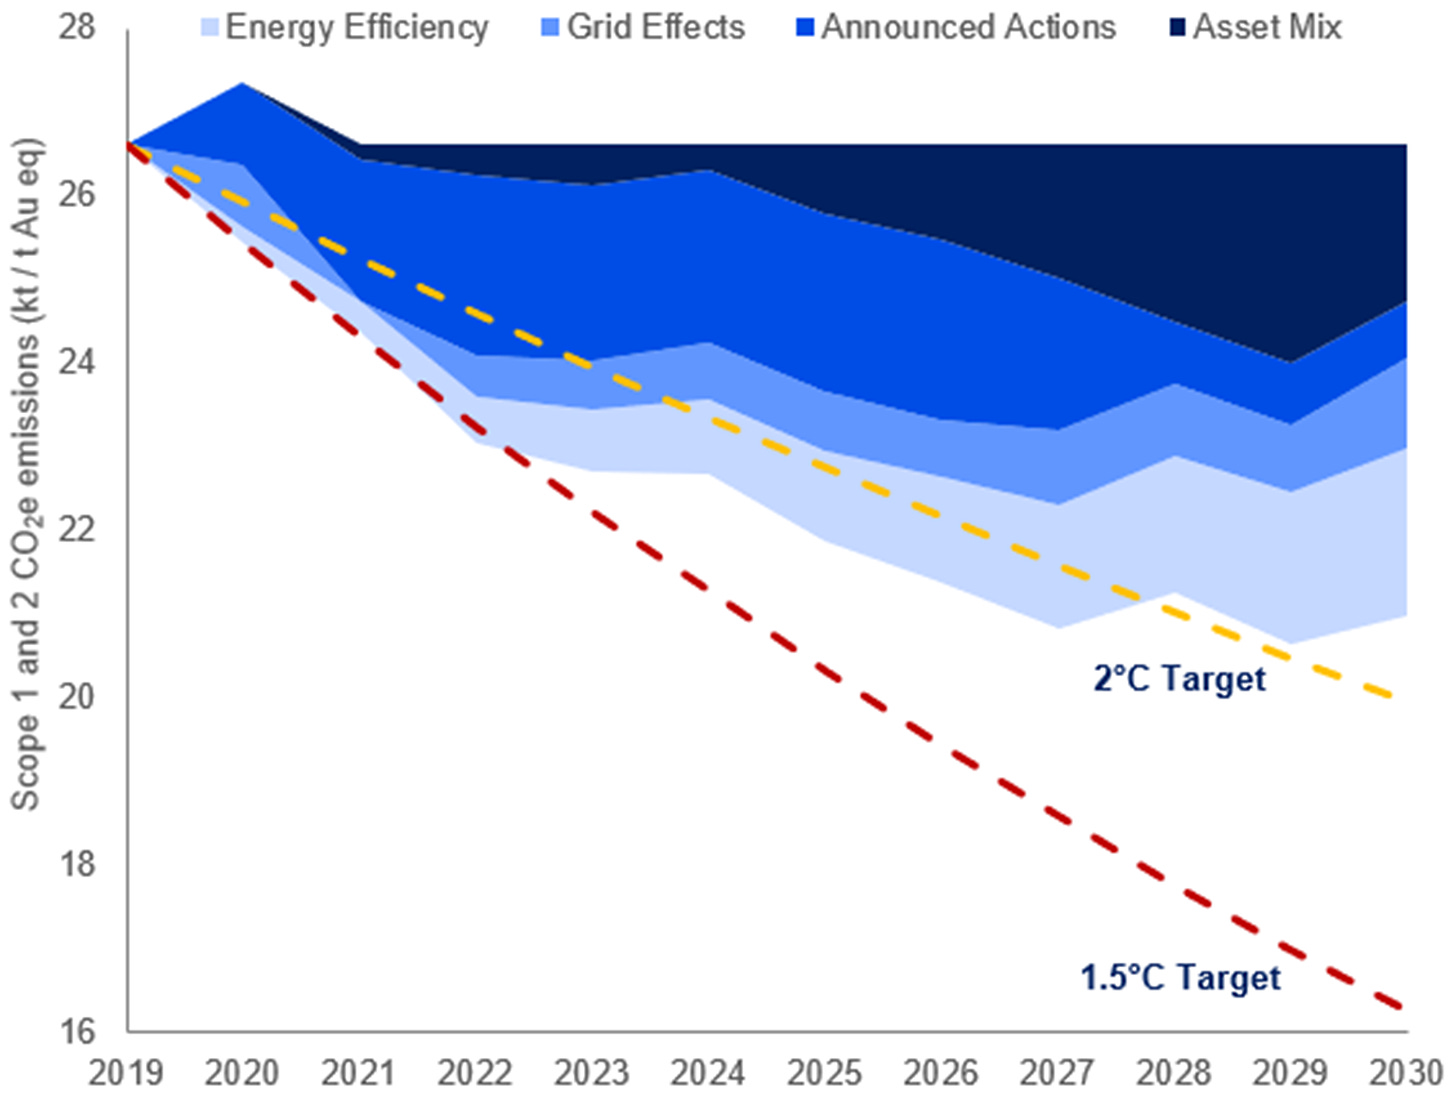 Carbon emissions intensity of gold mines, 2019 - 2030